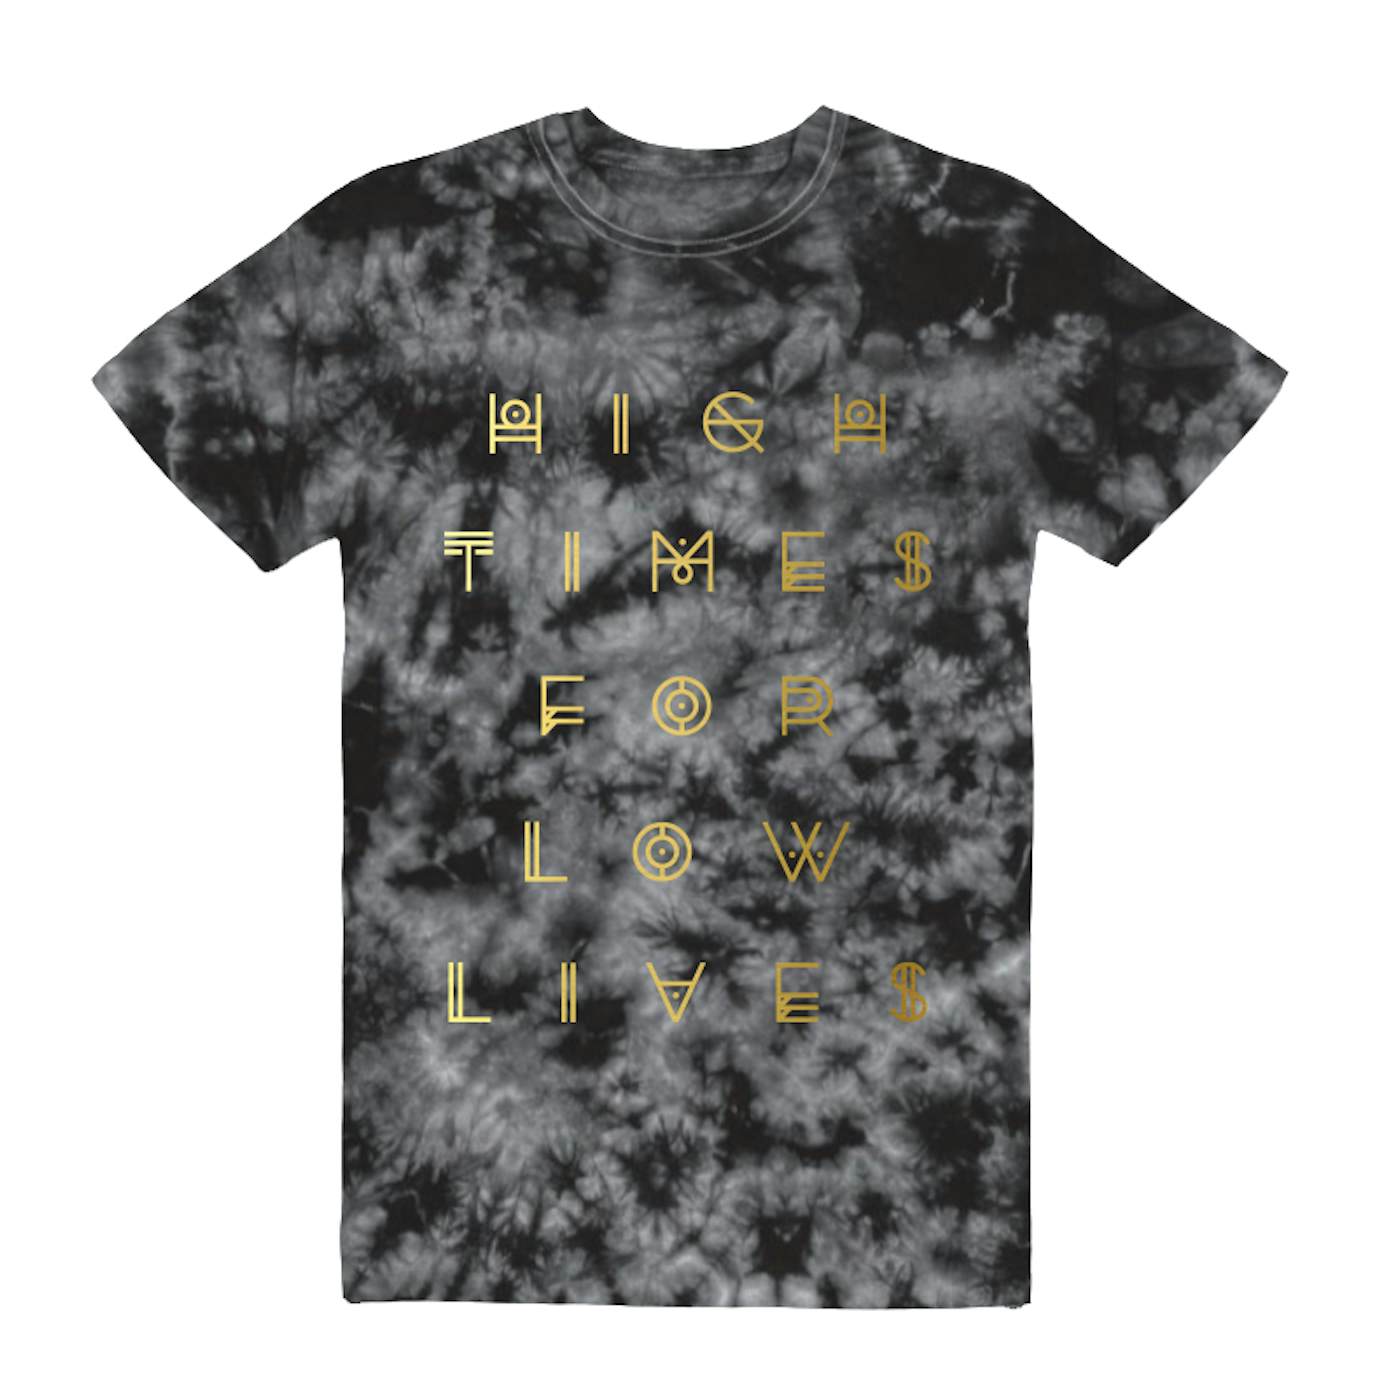 The Griswolds - High Times For Low Lives Tee